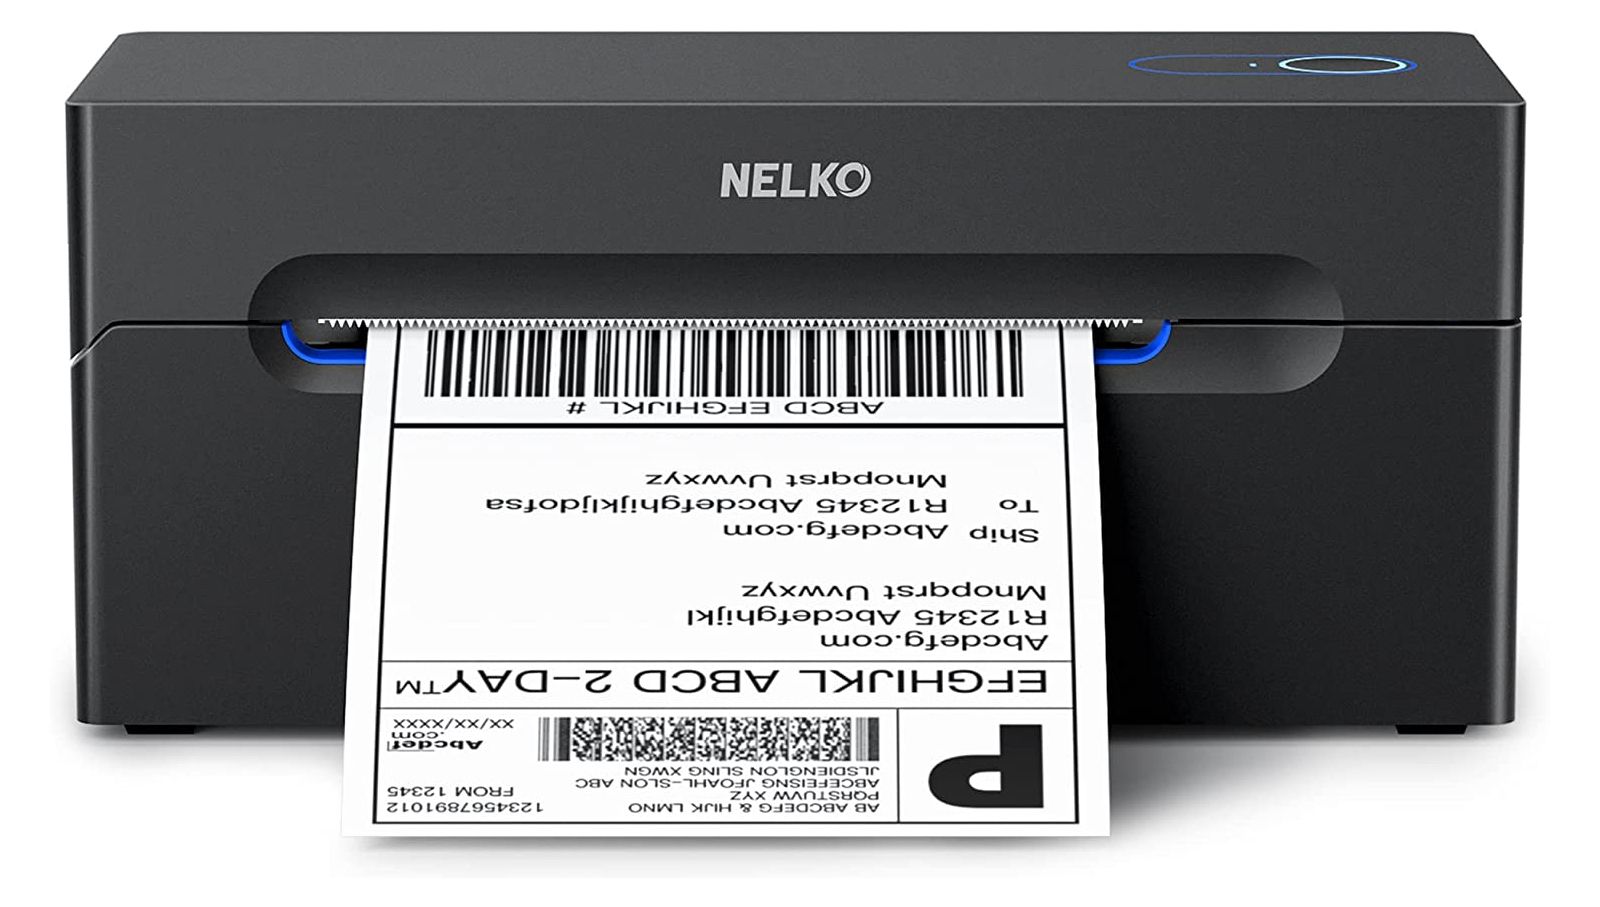 nelko printer with label being printed